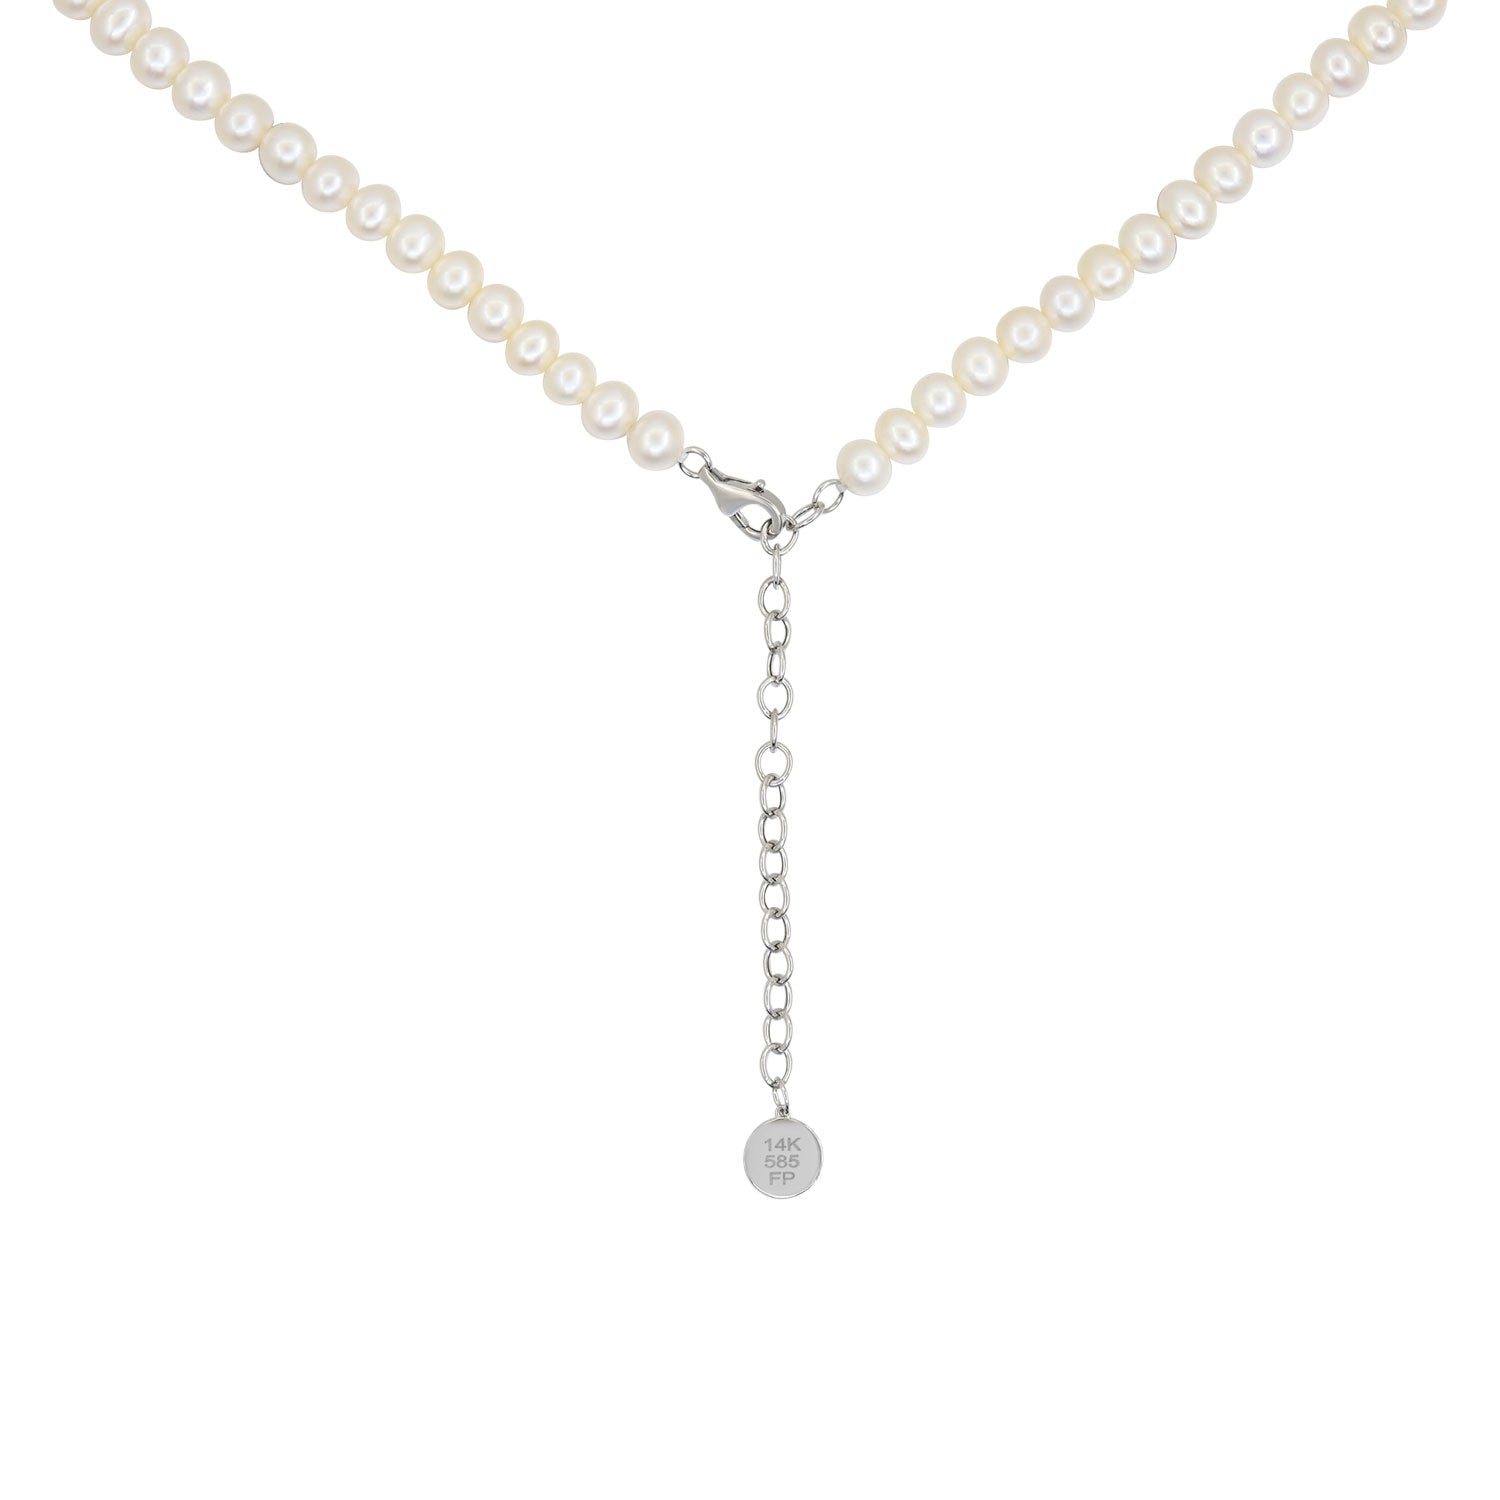 pearl_fifth_crosse_necklace_14k_white_gold_4